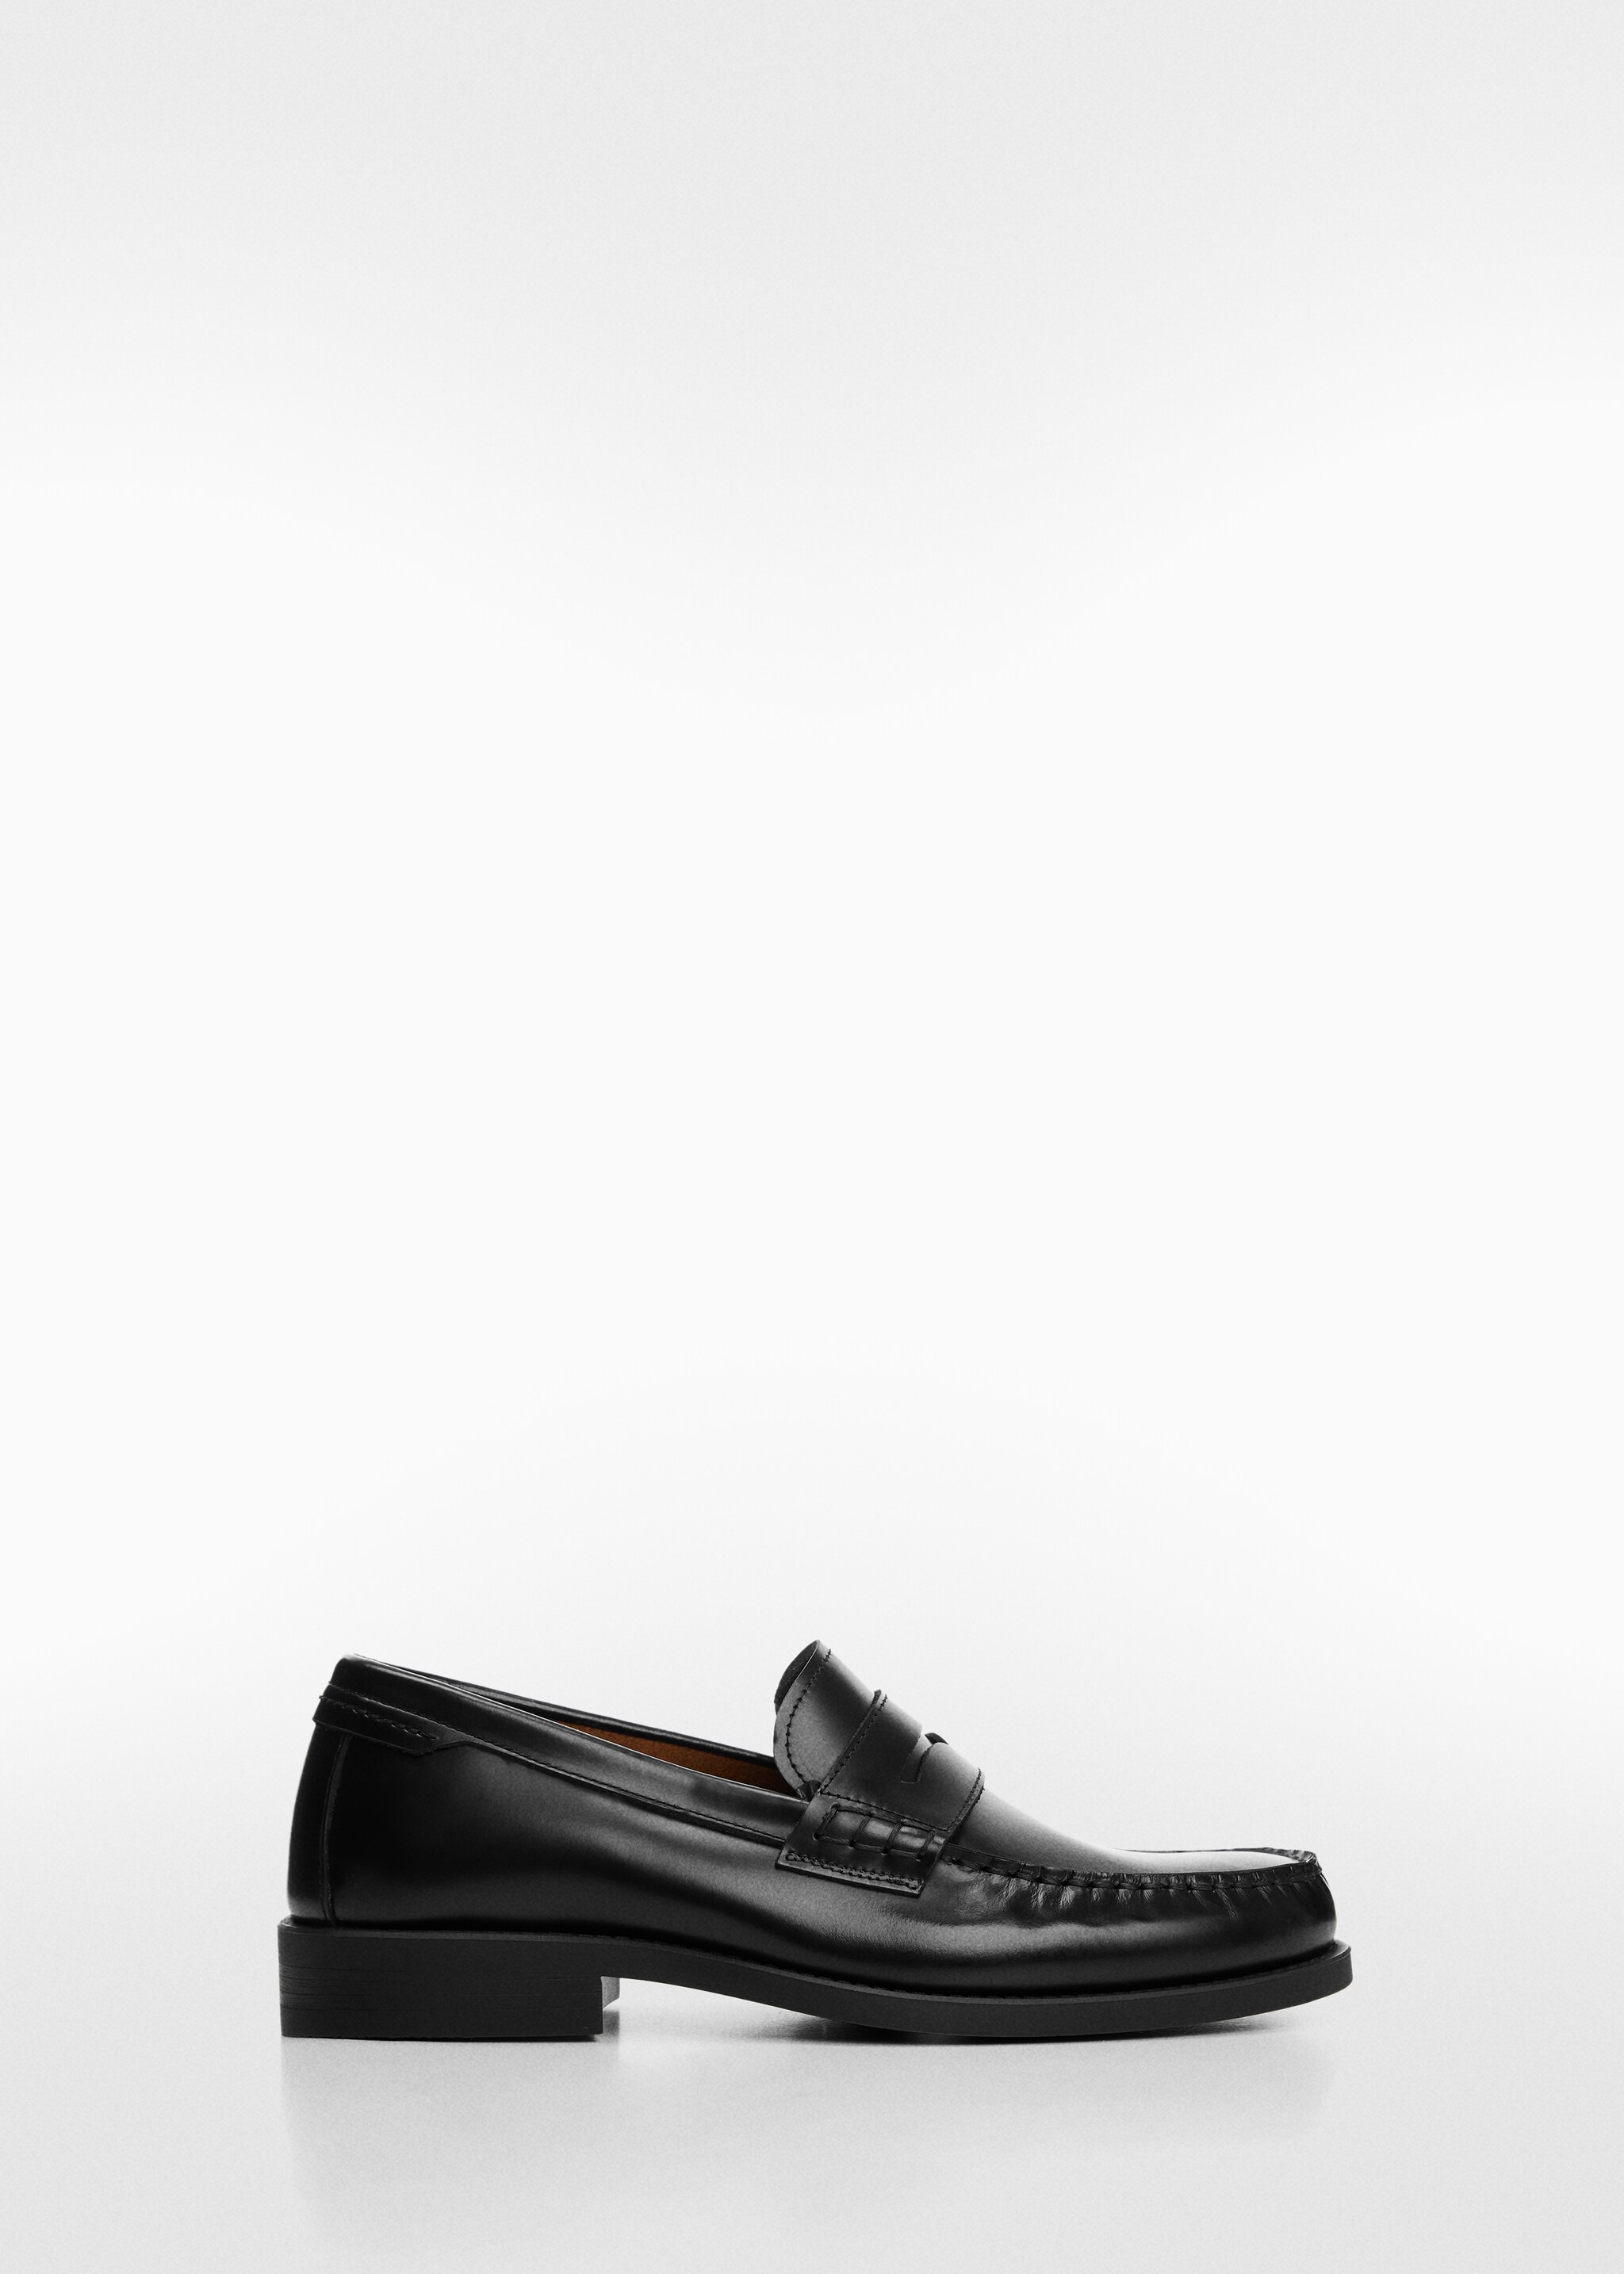 Aged-leather loafers - Article without model